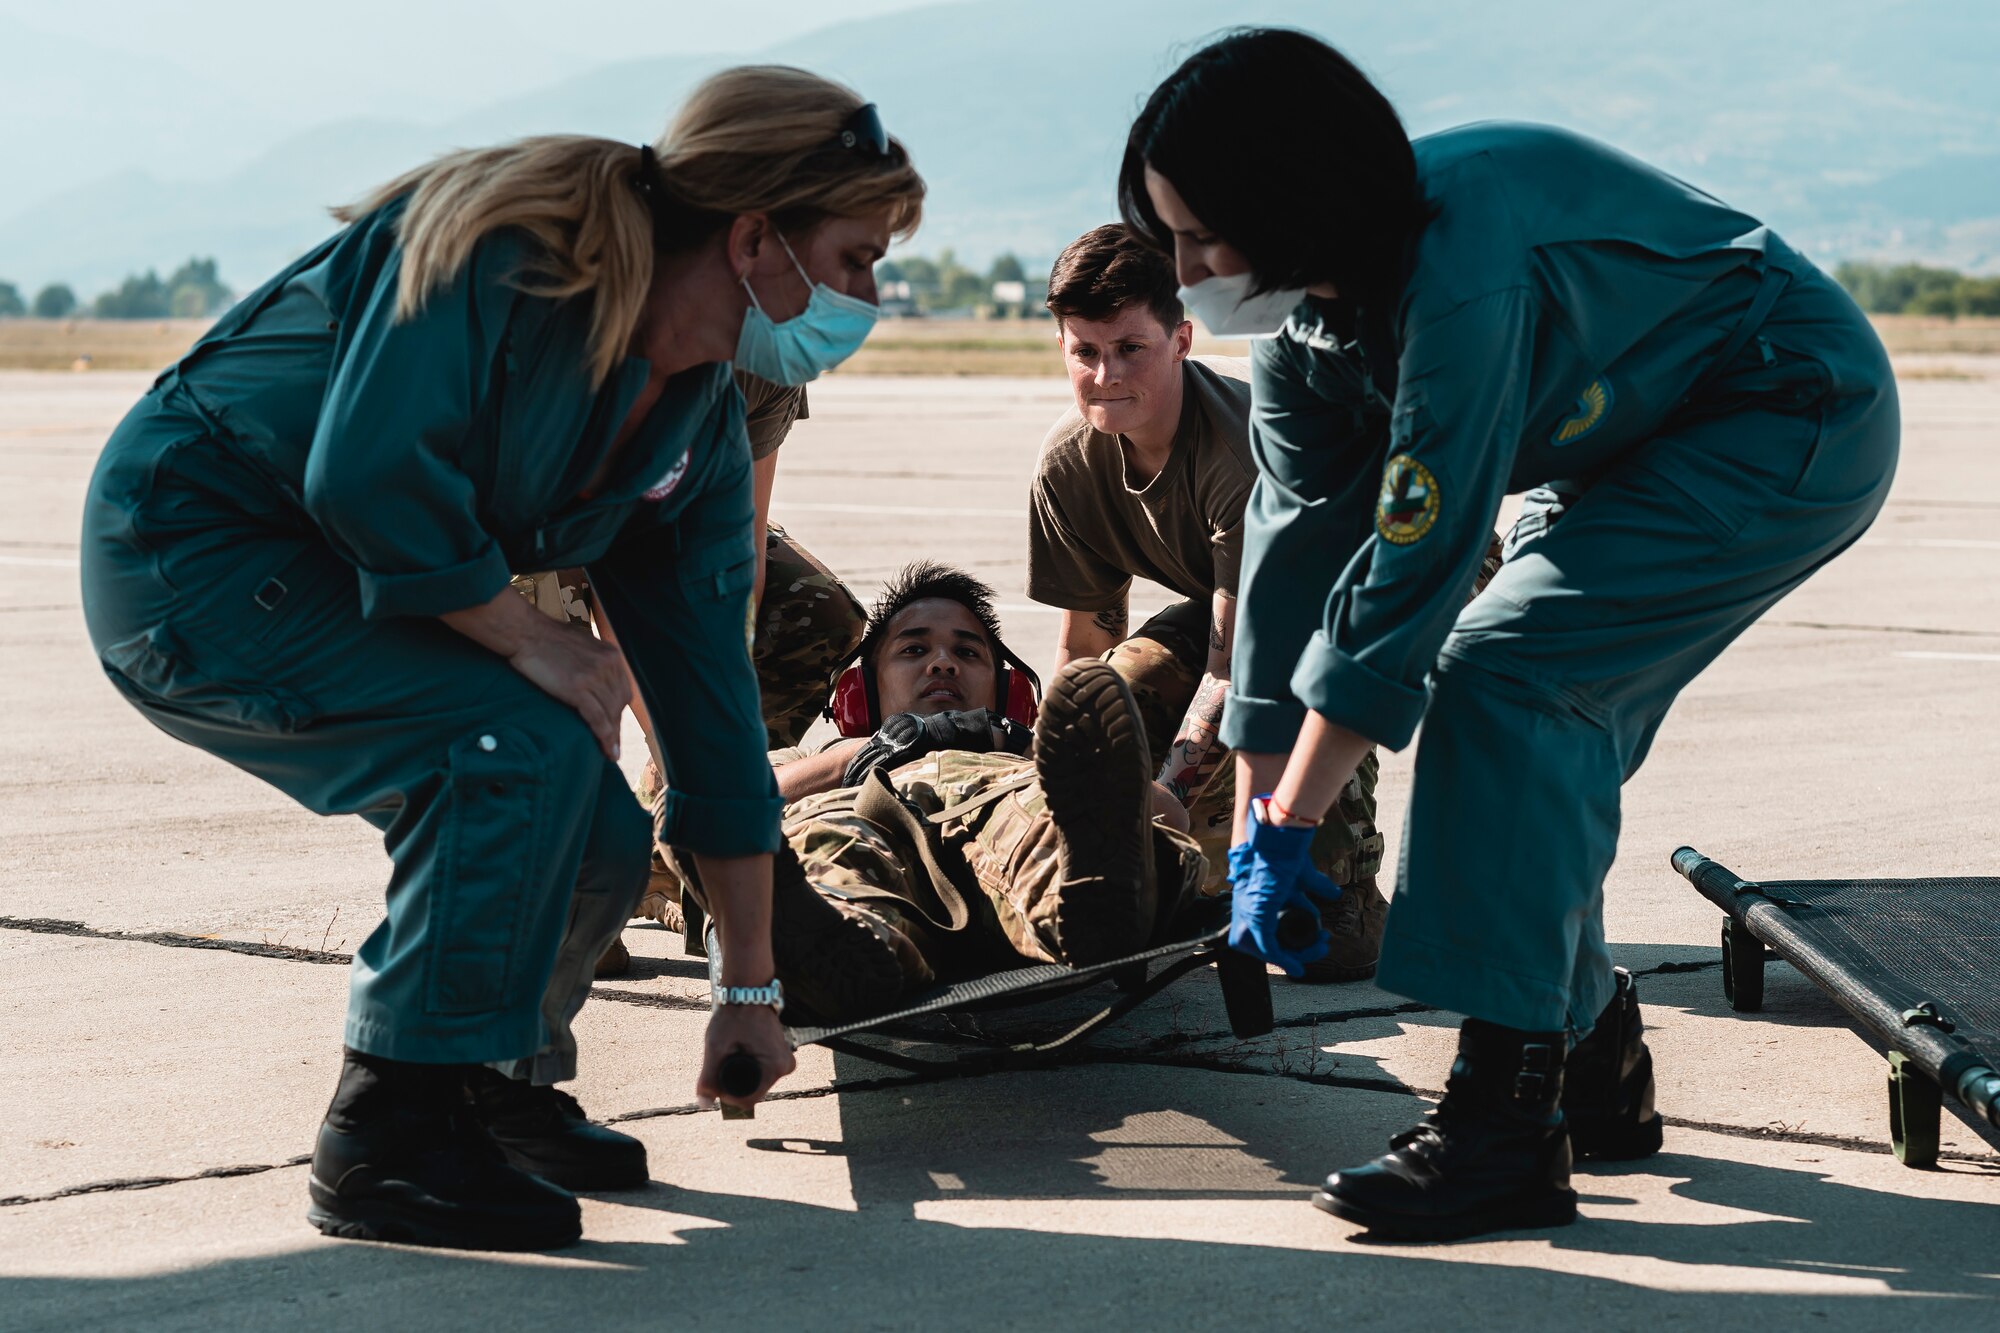 Image of Airmen lifting a patient.